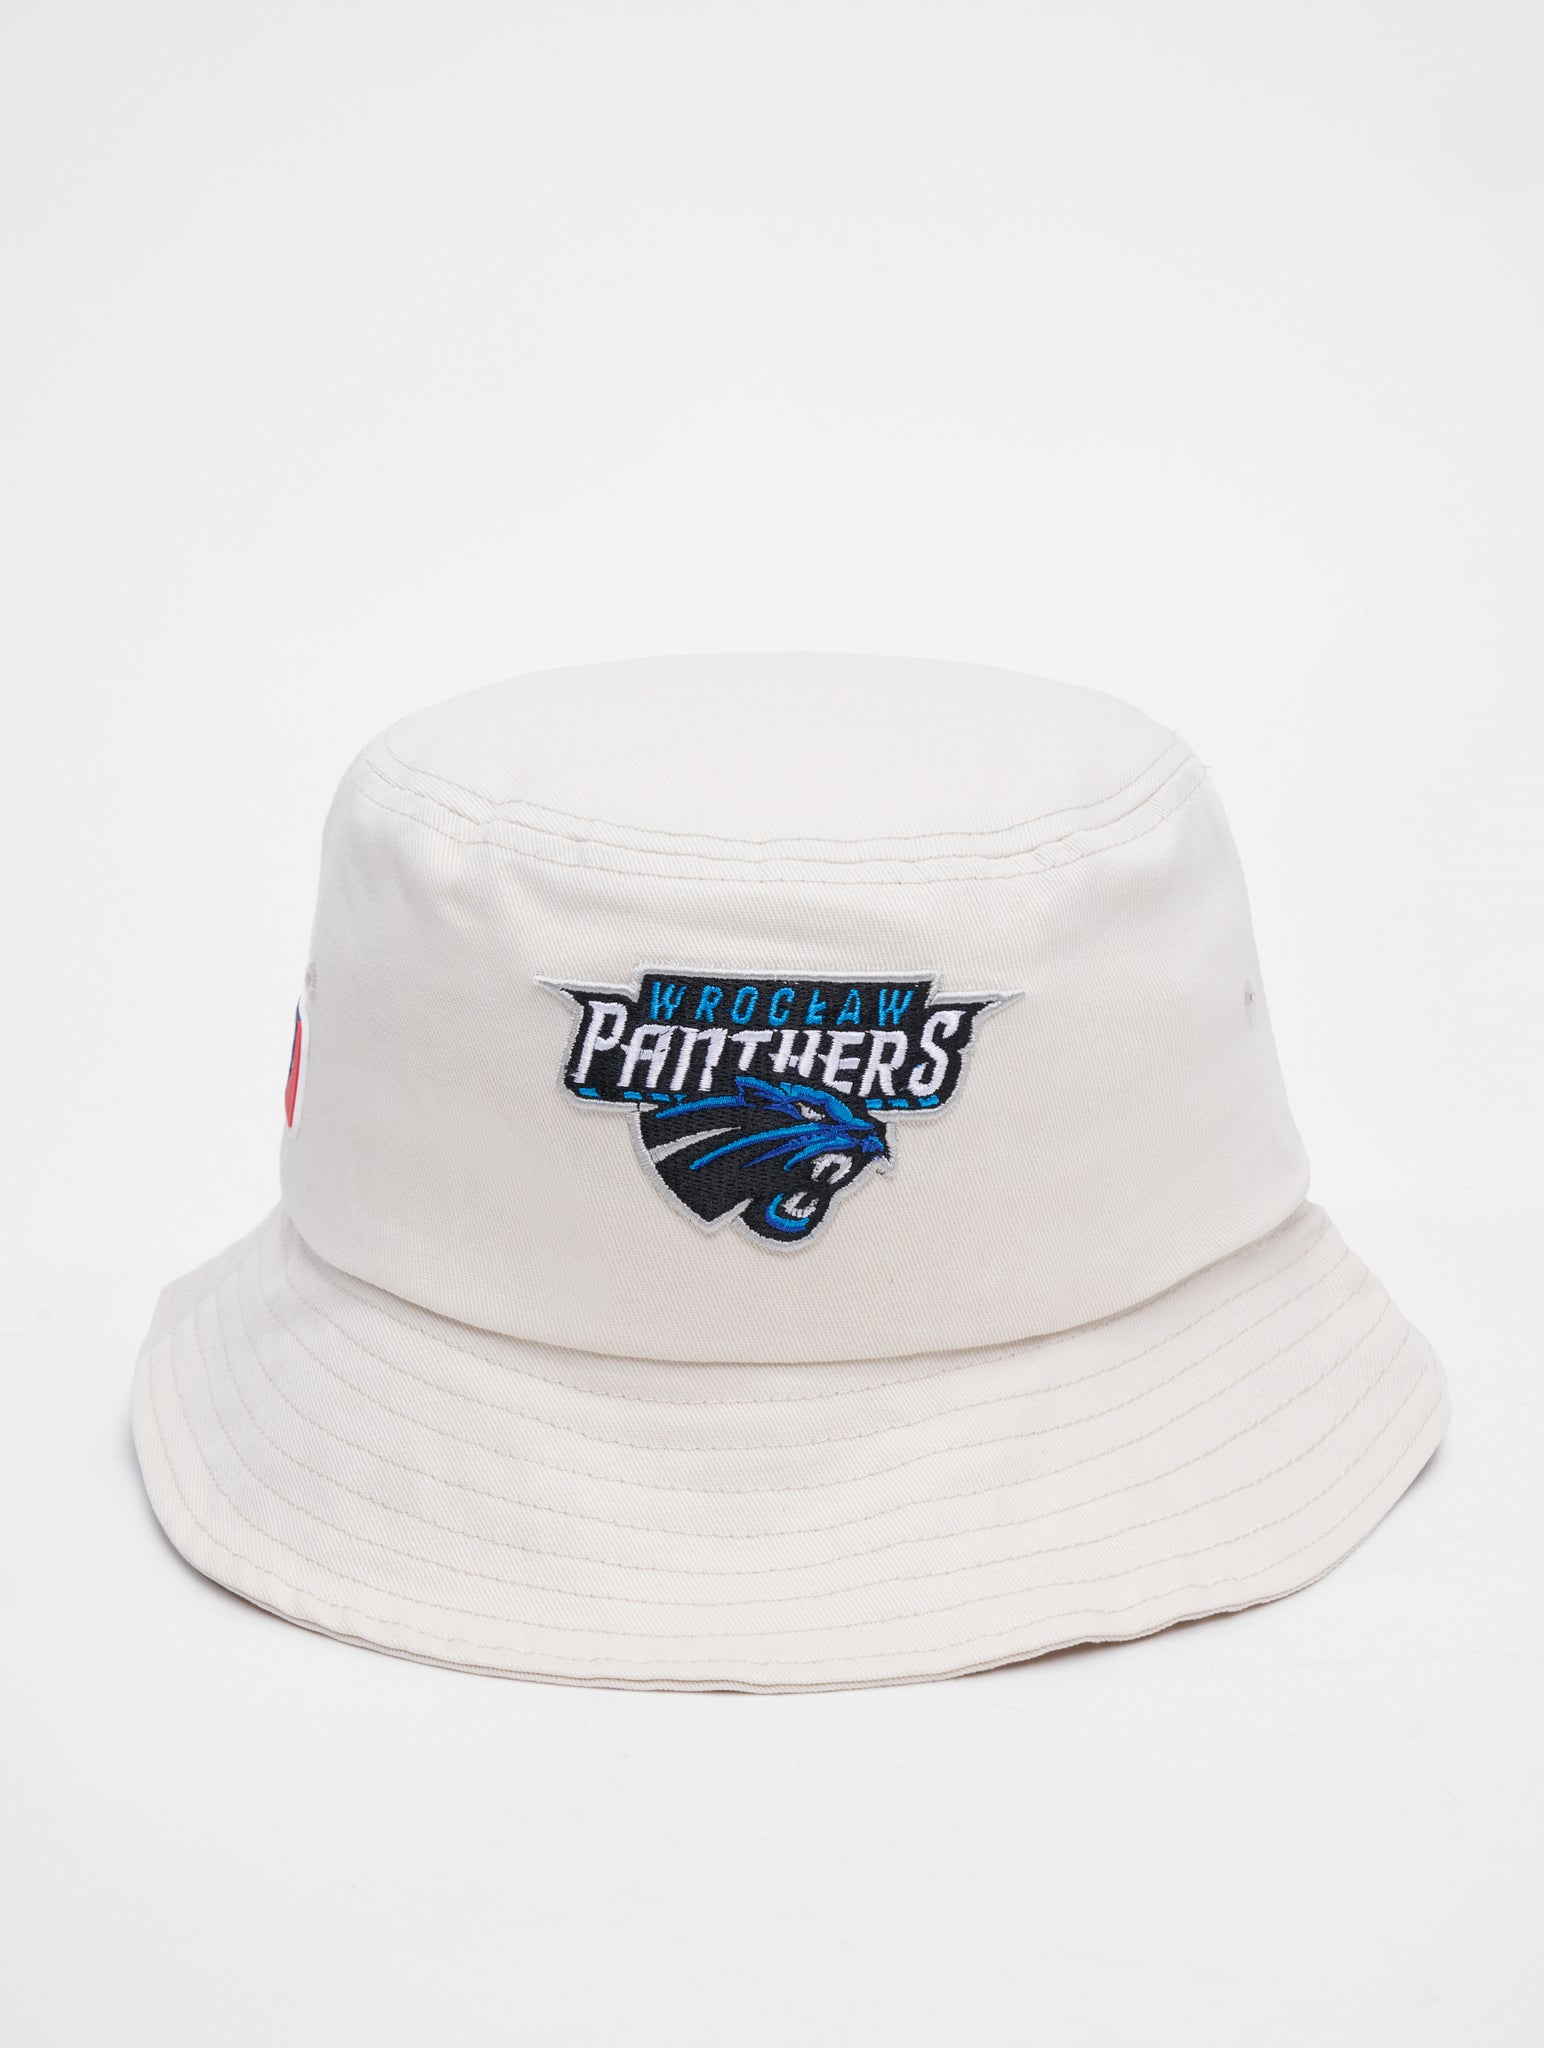 Wroclaw Panthers Bucket Hat 2024 Design 2